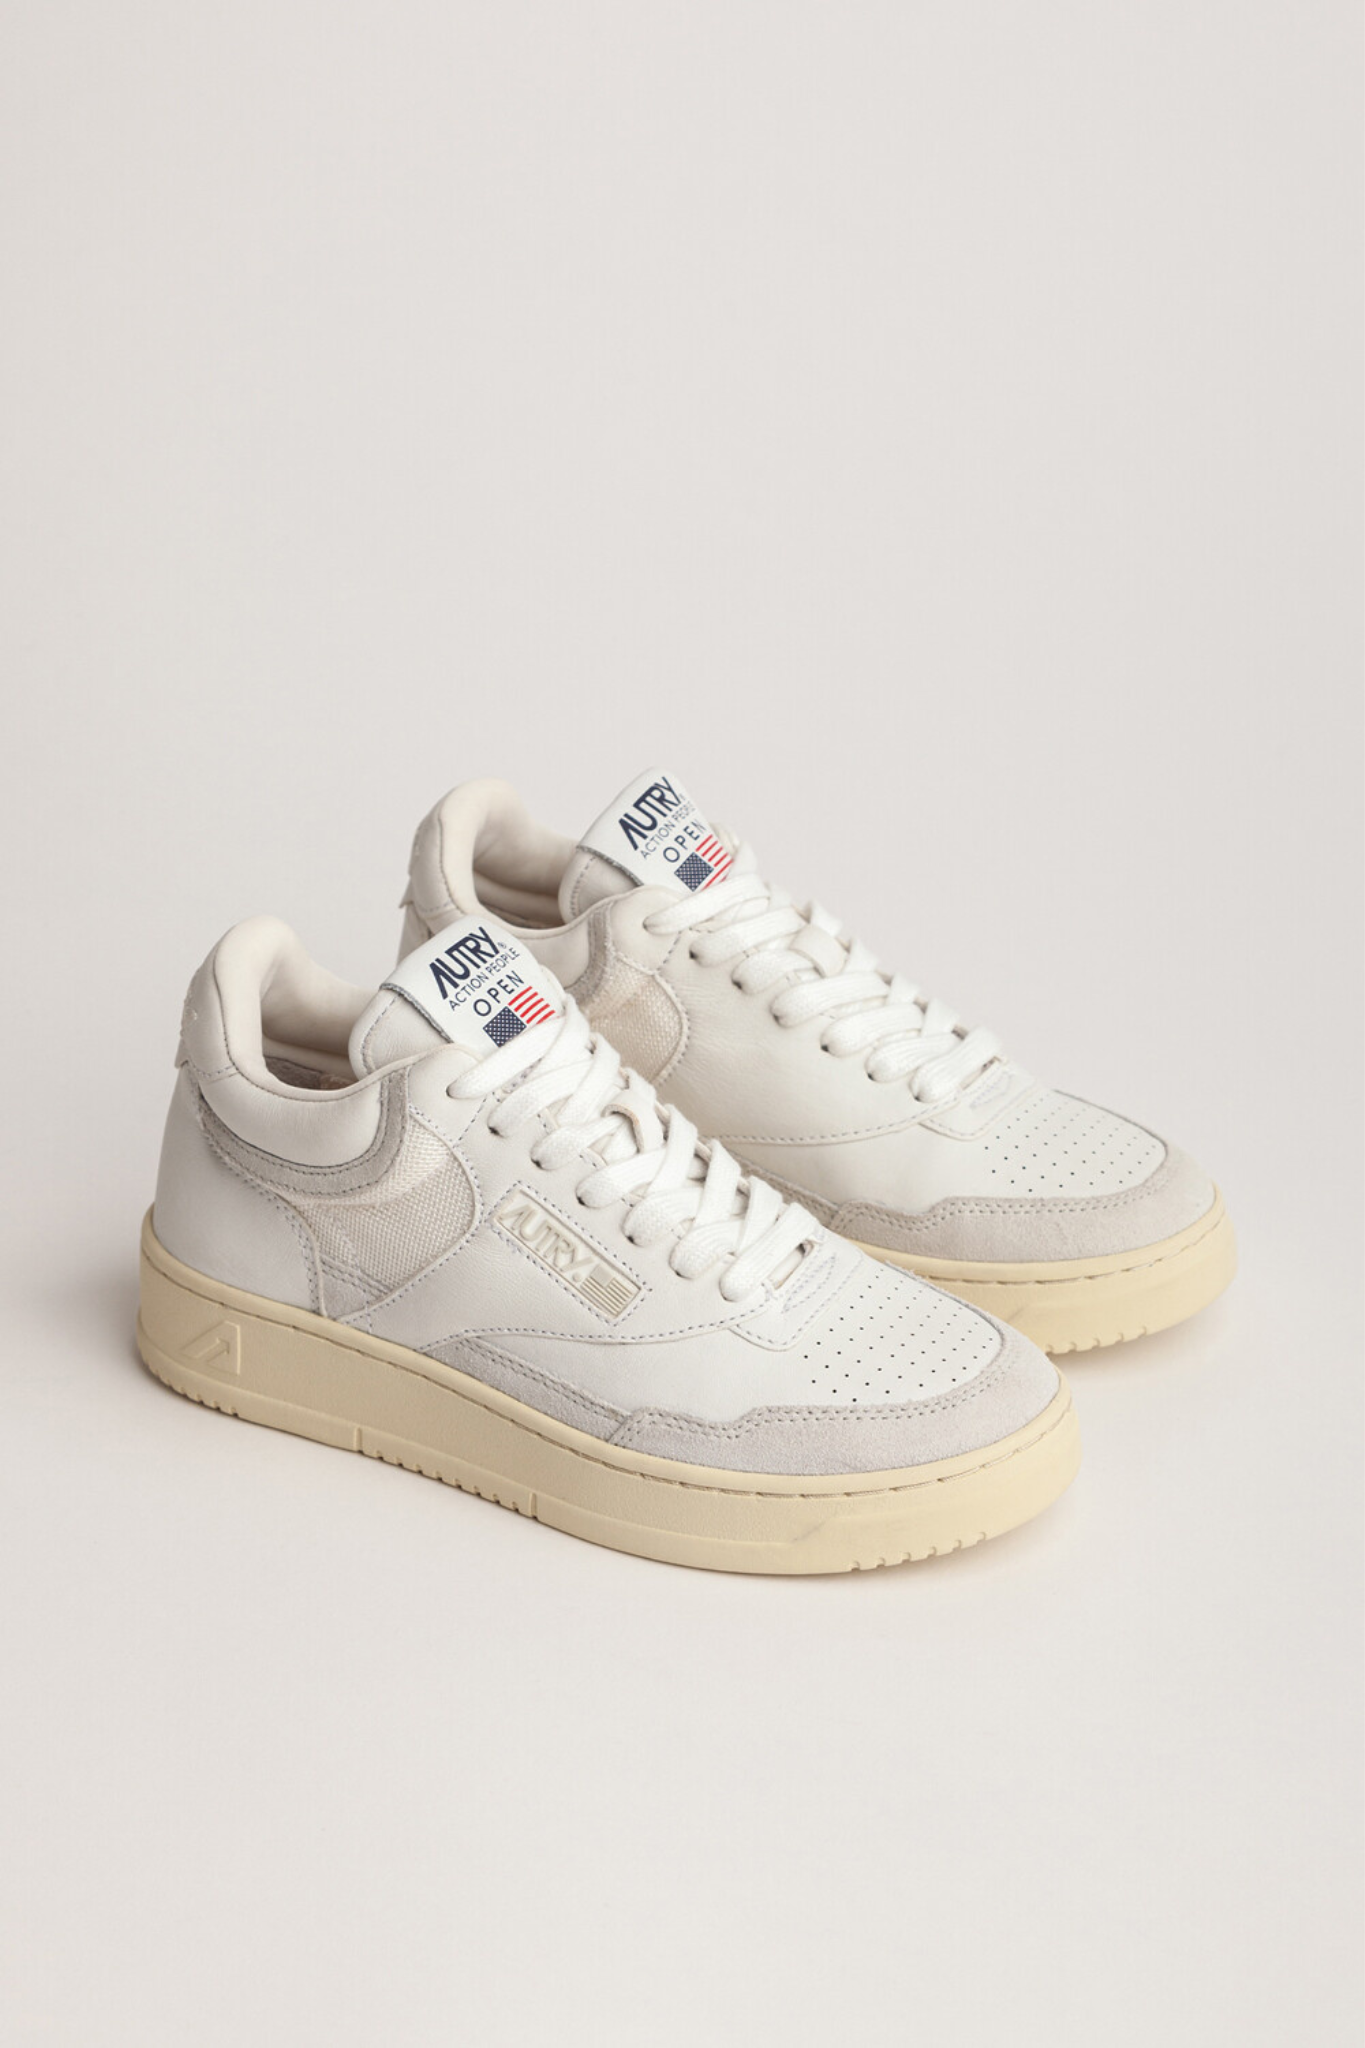 AOMM-CE11 - OPEN MID-TOP SNEAKERS IN LEATHER, MESH AND SUEDE COLOR WHITE